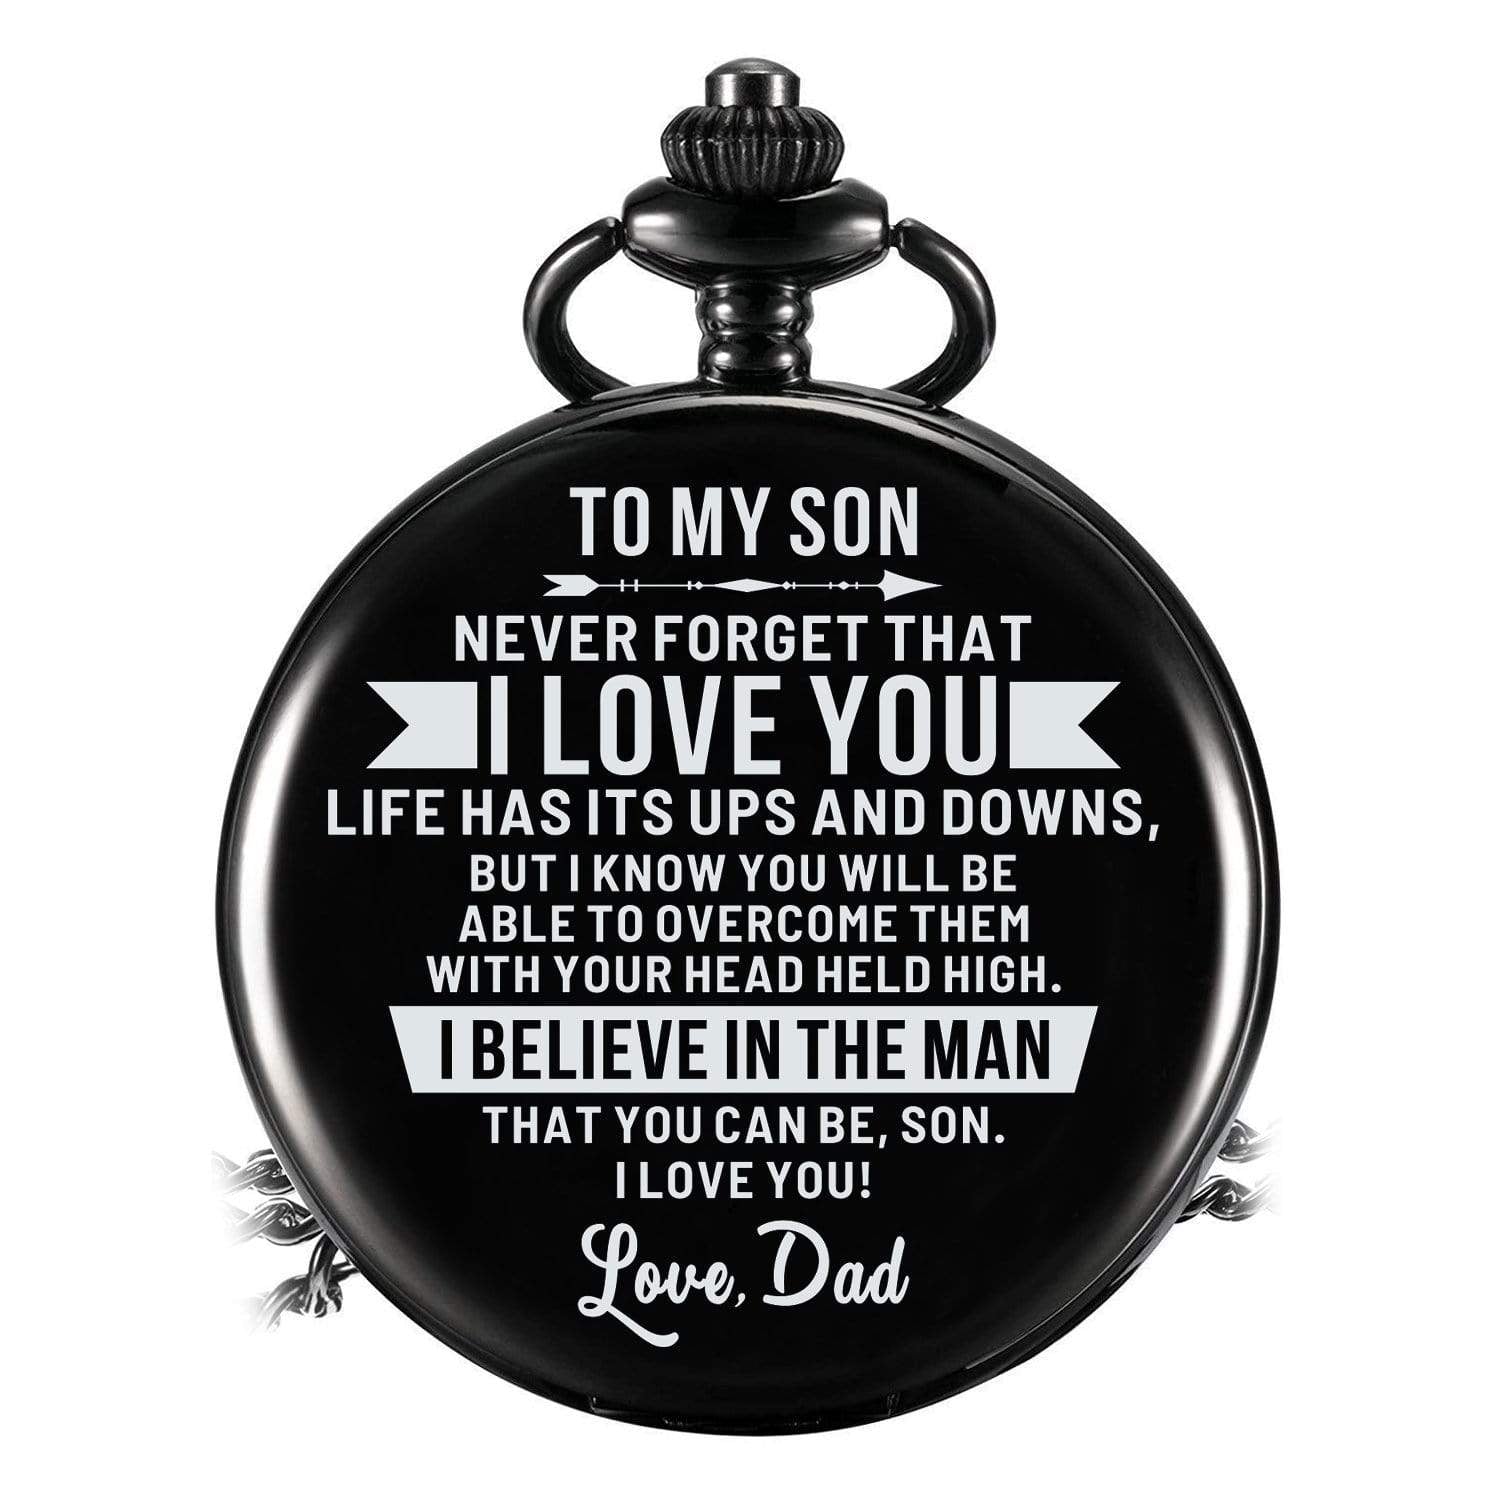 Pocket Watches Dad To Son - I Believe In The Man Pocket Watch GiveMe-Gifts